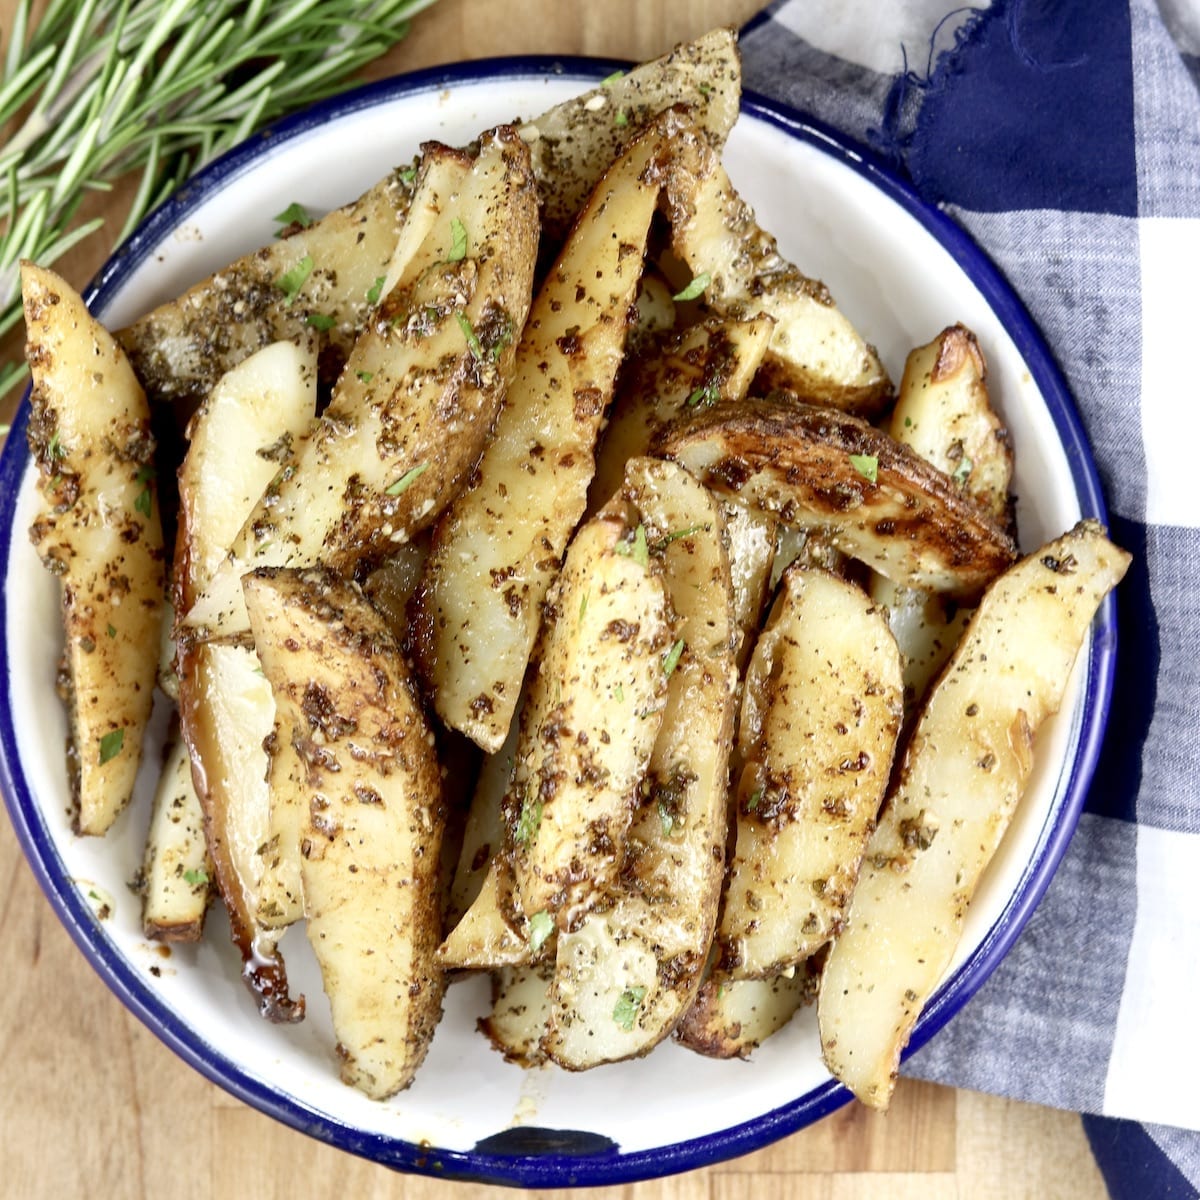 Grilled potatoes with garlic and rosemary butter in a bowl